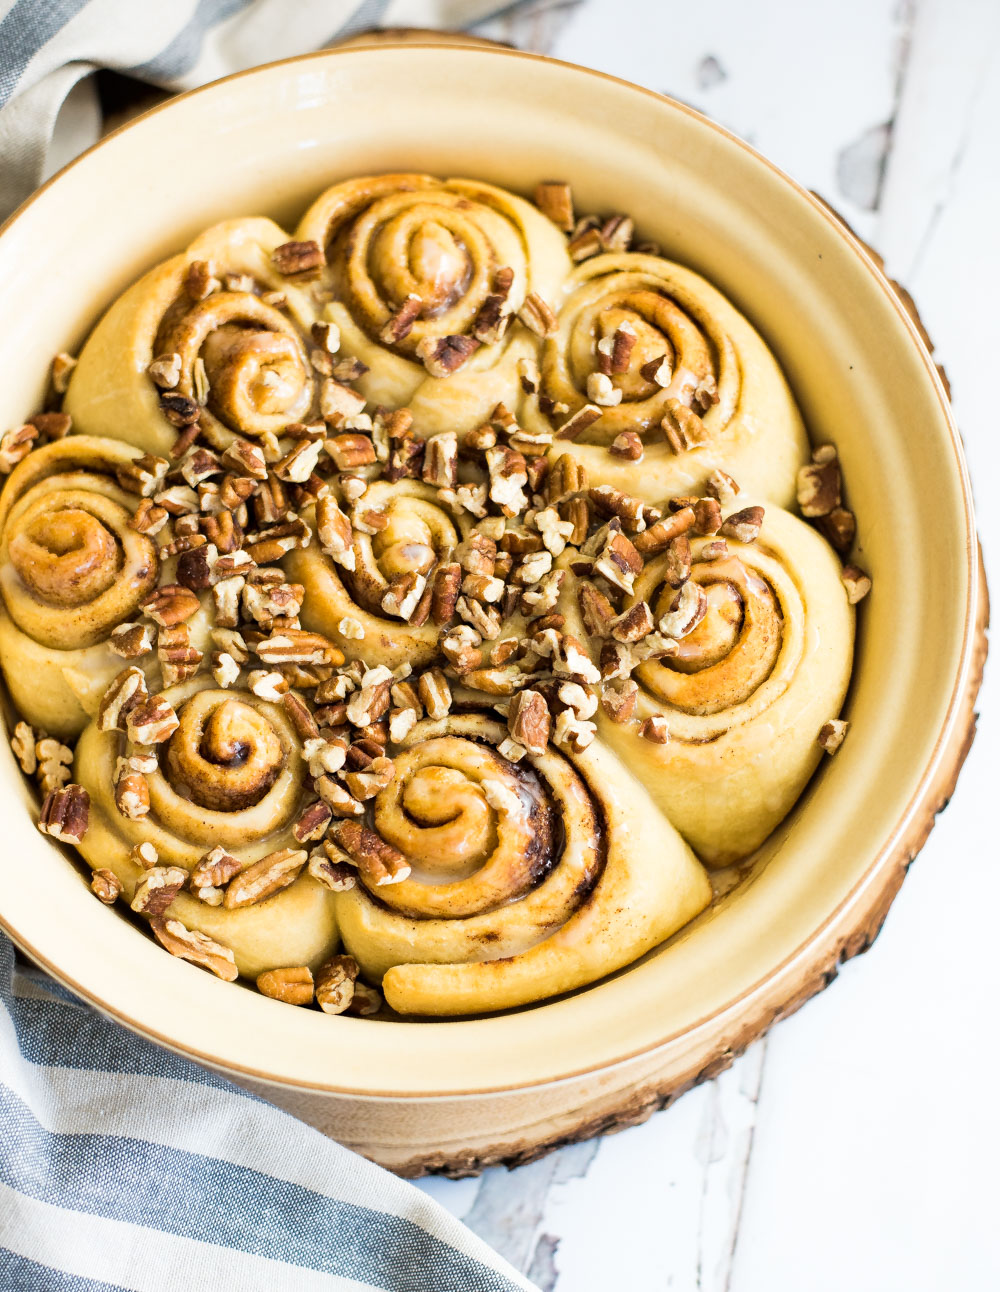 Cinnamon rolls were never so easy to make! These vegan cinnamon rolls only require a handful of ingredients and super simple instructions. Make them soon!